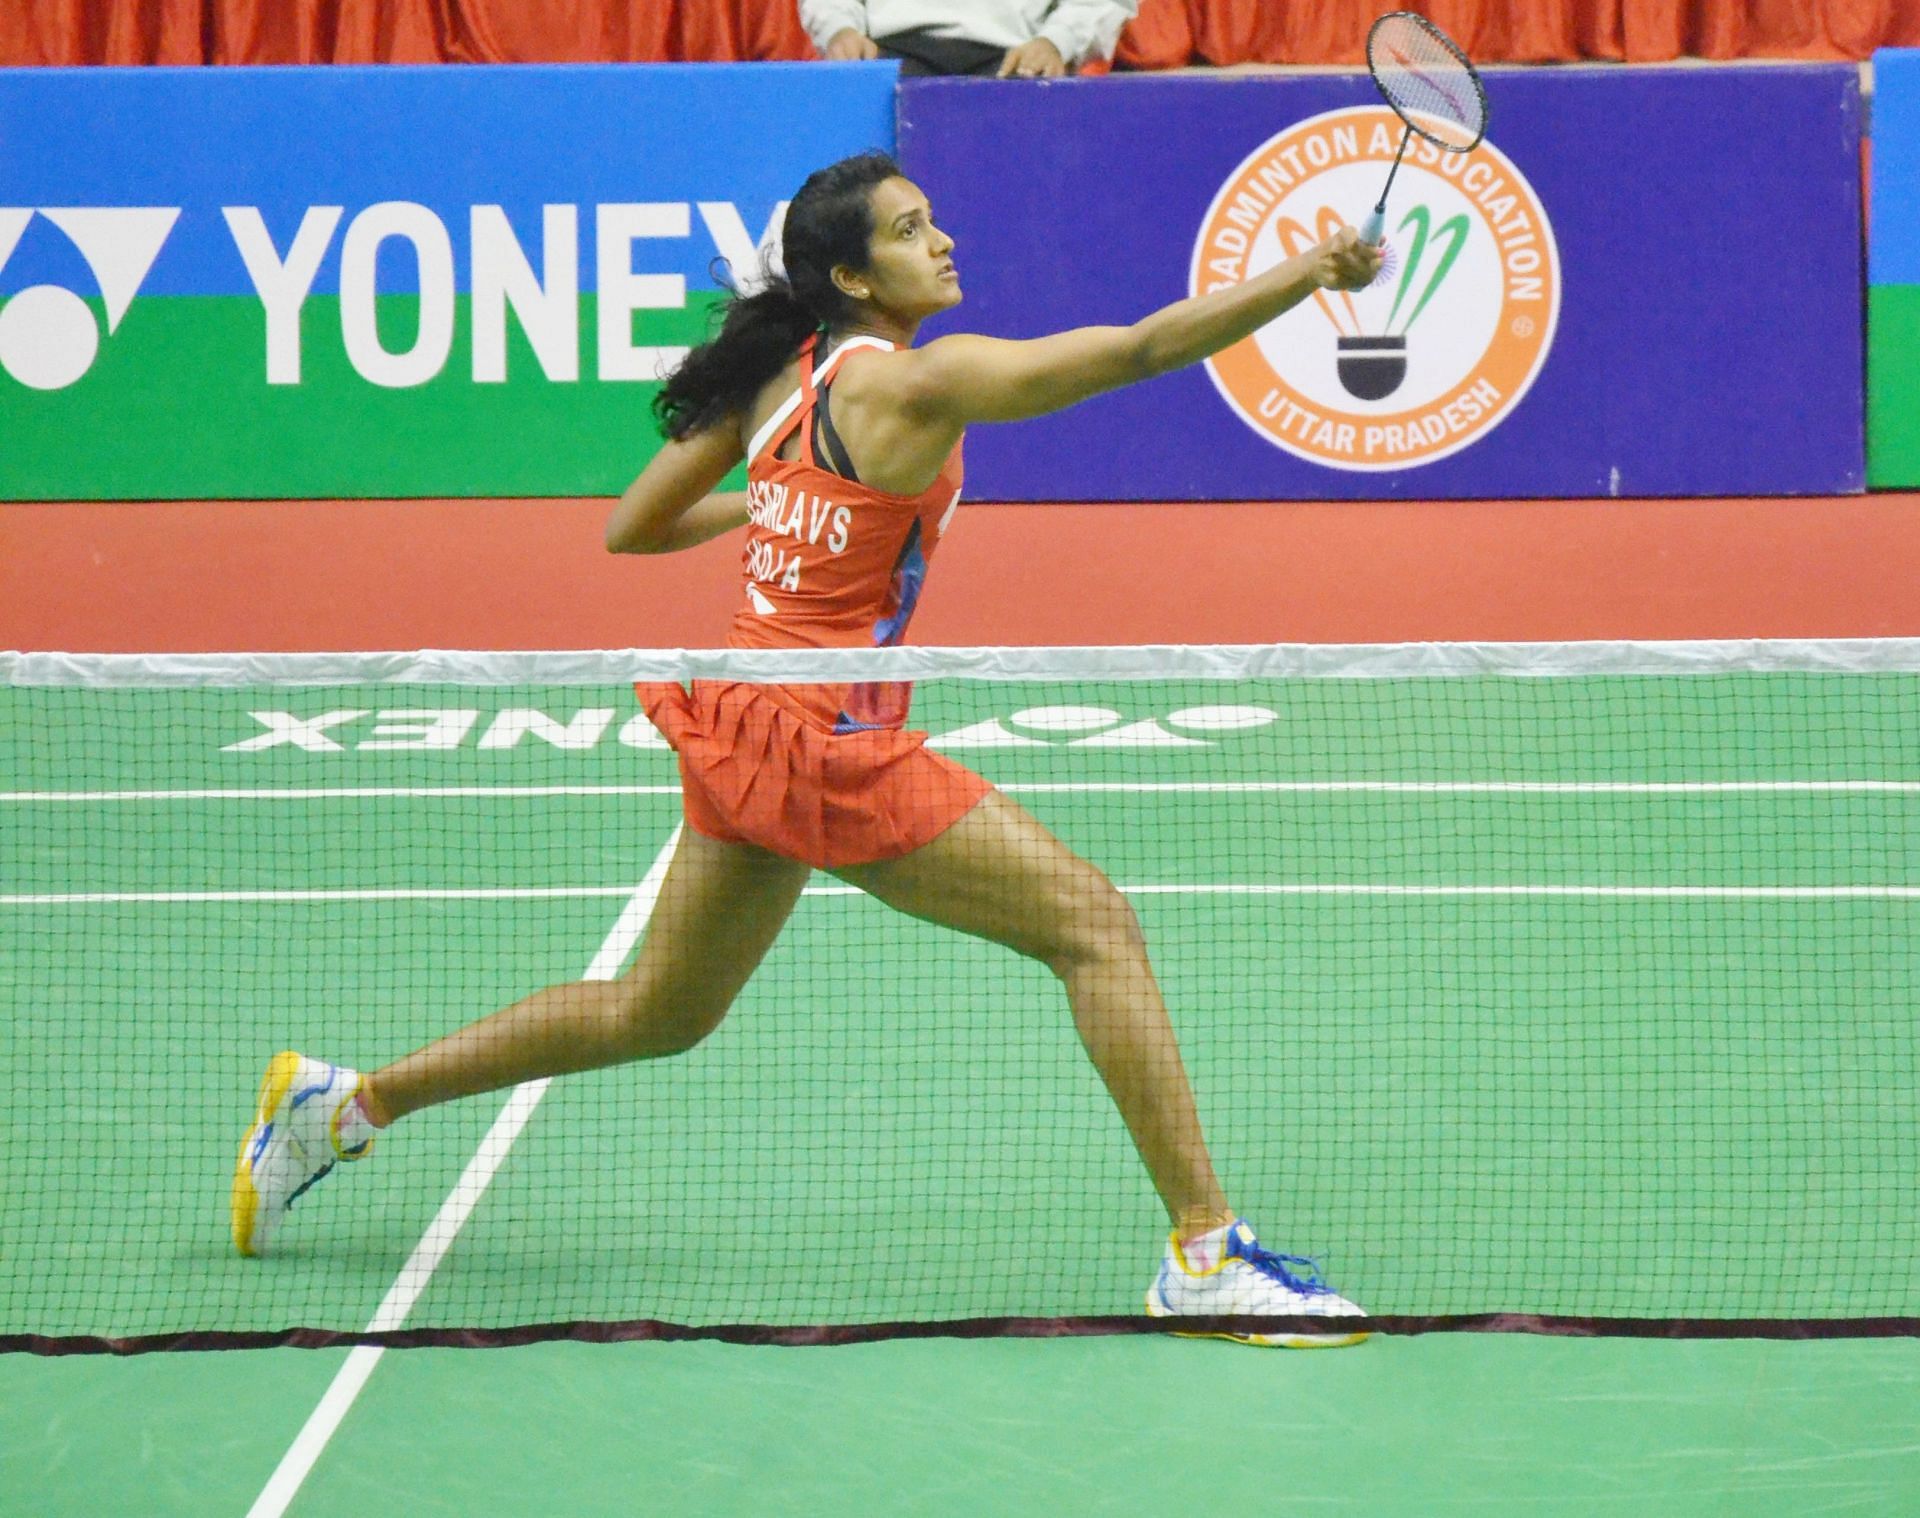 Third seed PV Sindhu beat Lauren Lam of USA 21-15, 21-14 in the Korea Open first round on Wednesday. (Pic credit: BAI)